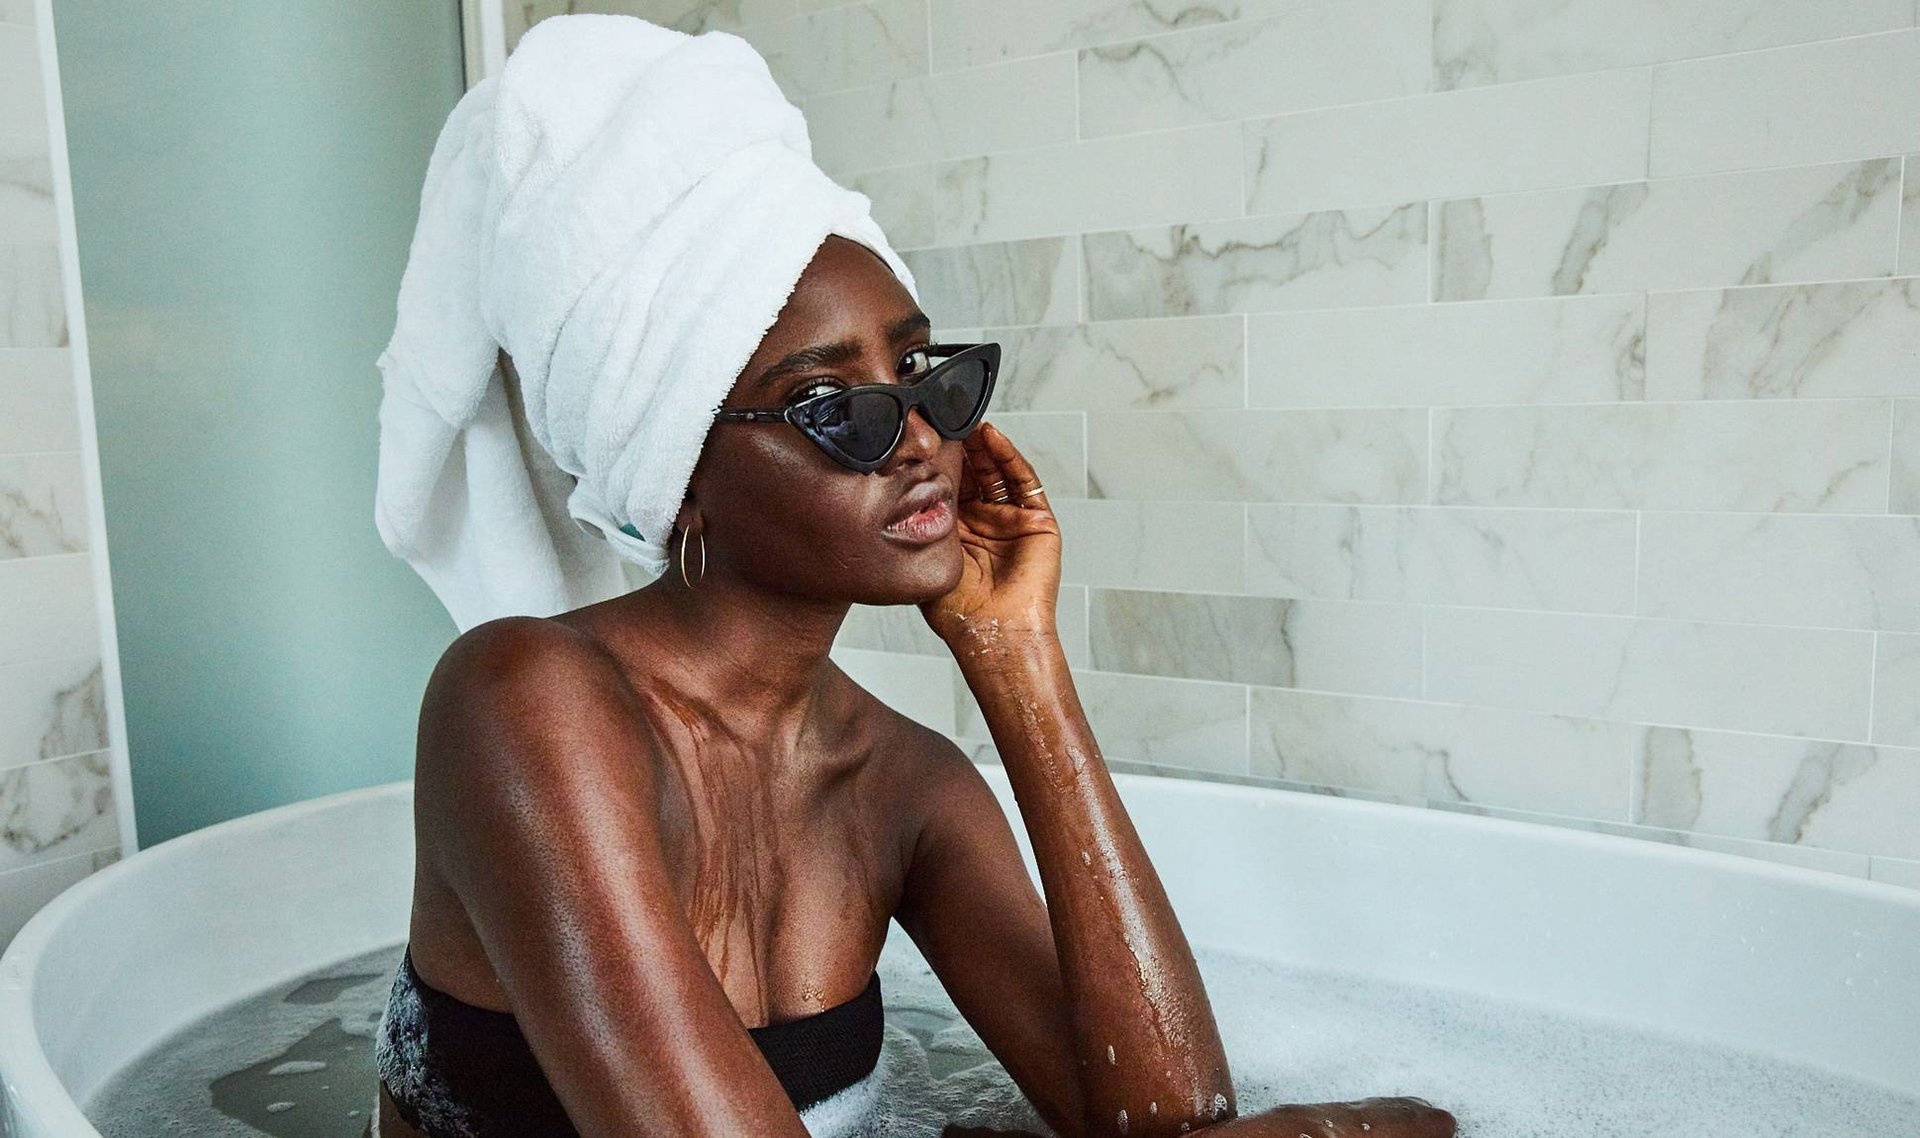 6 Moisturizing Body Products for a Frothy, Milky Bath or Shower Experience